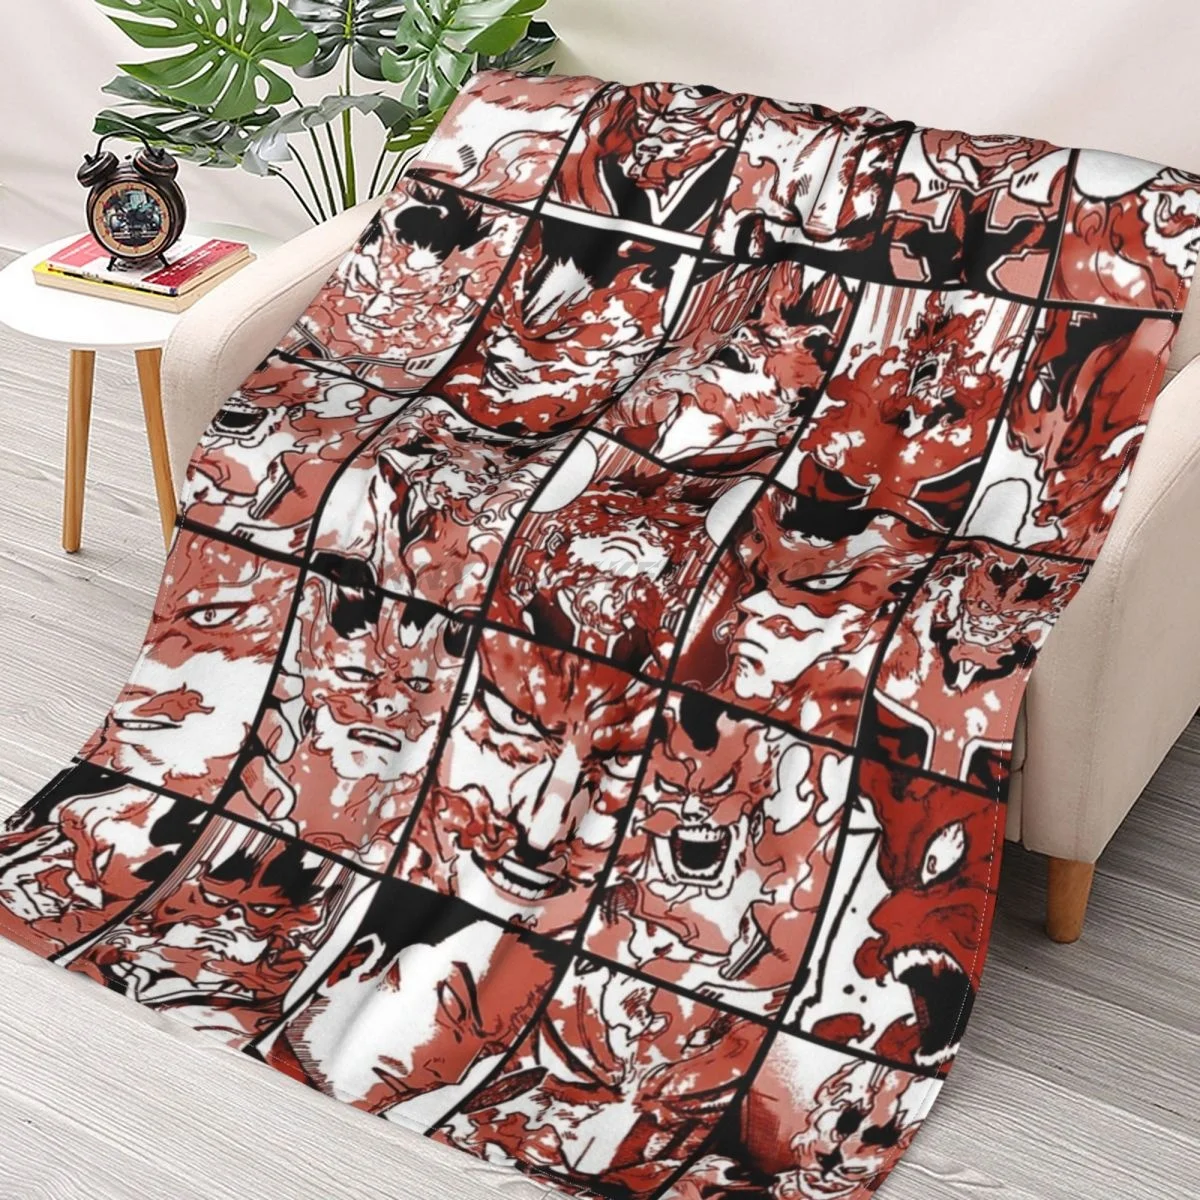 

Endeavor - My Hero Academia Collage Throws Blankets Collage Flannel Ultra-Soft Warm picnic blanket bedspread on the bed